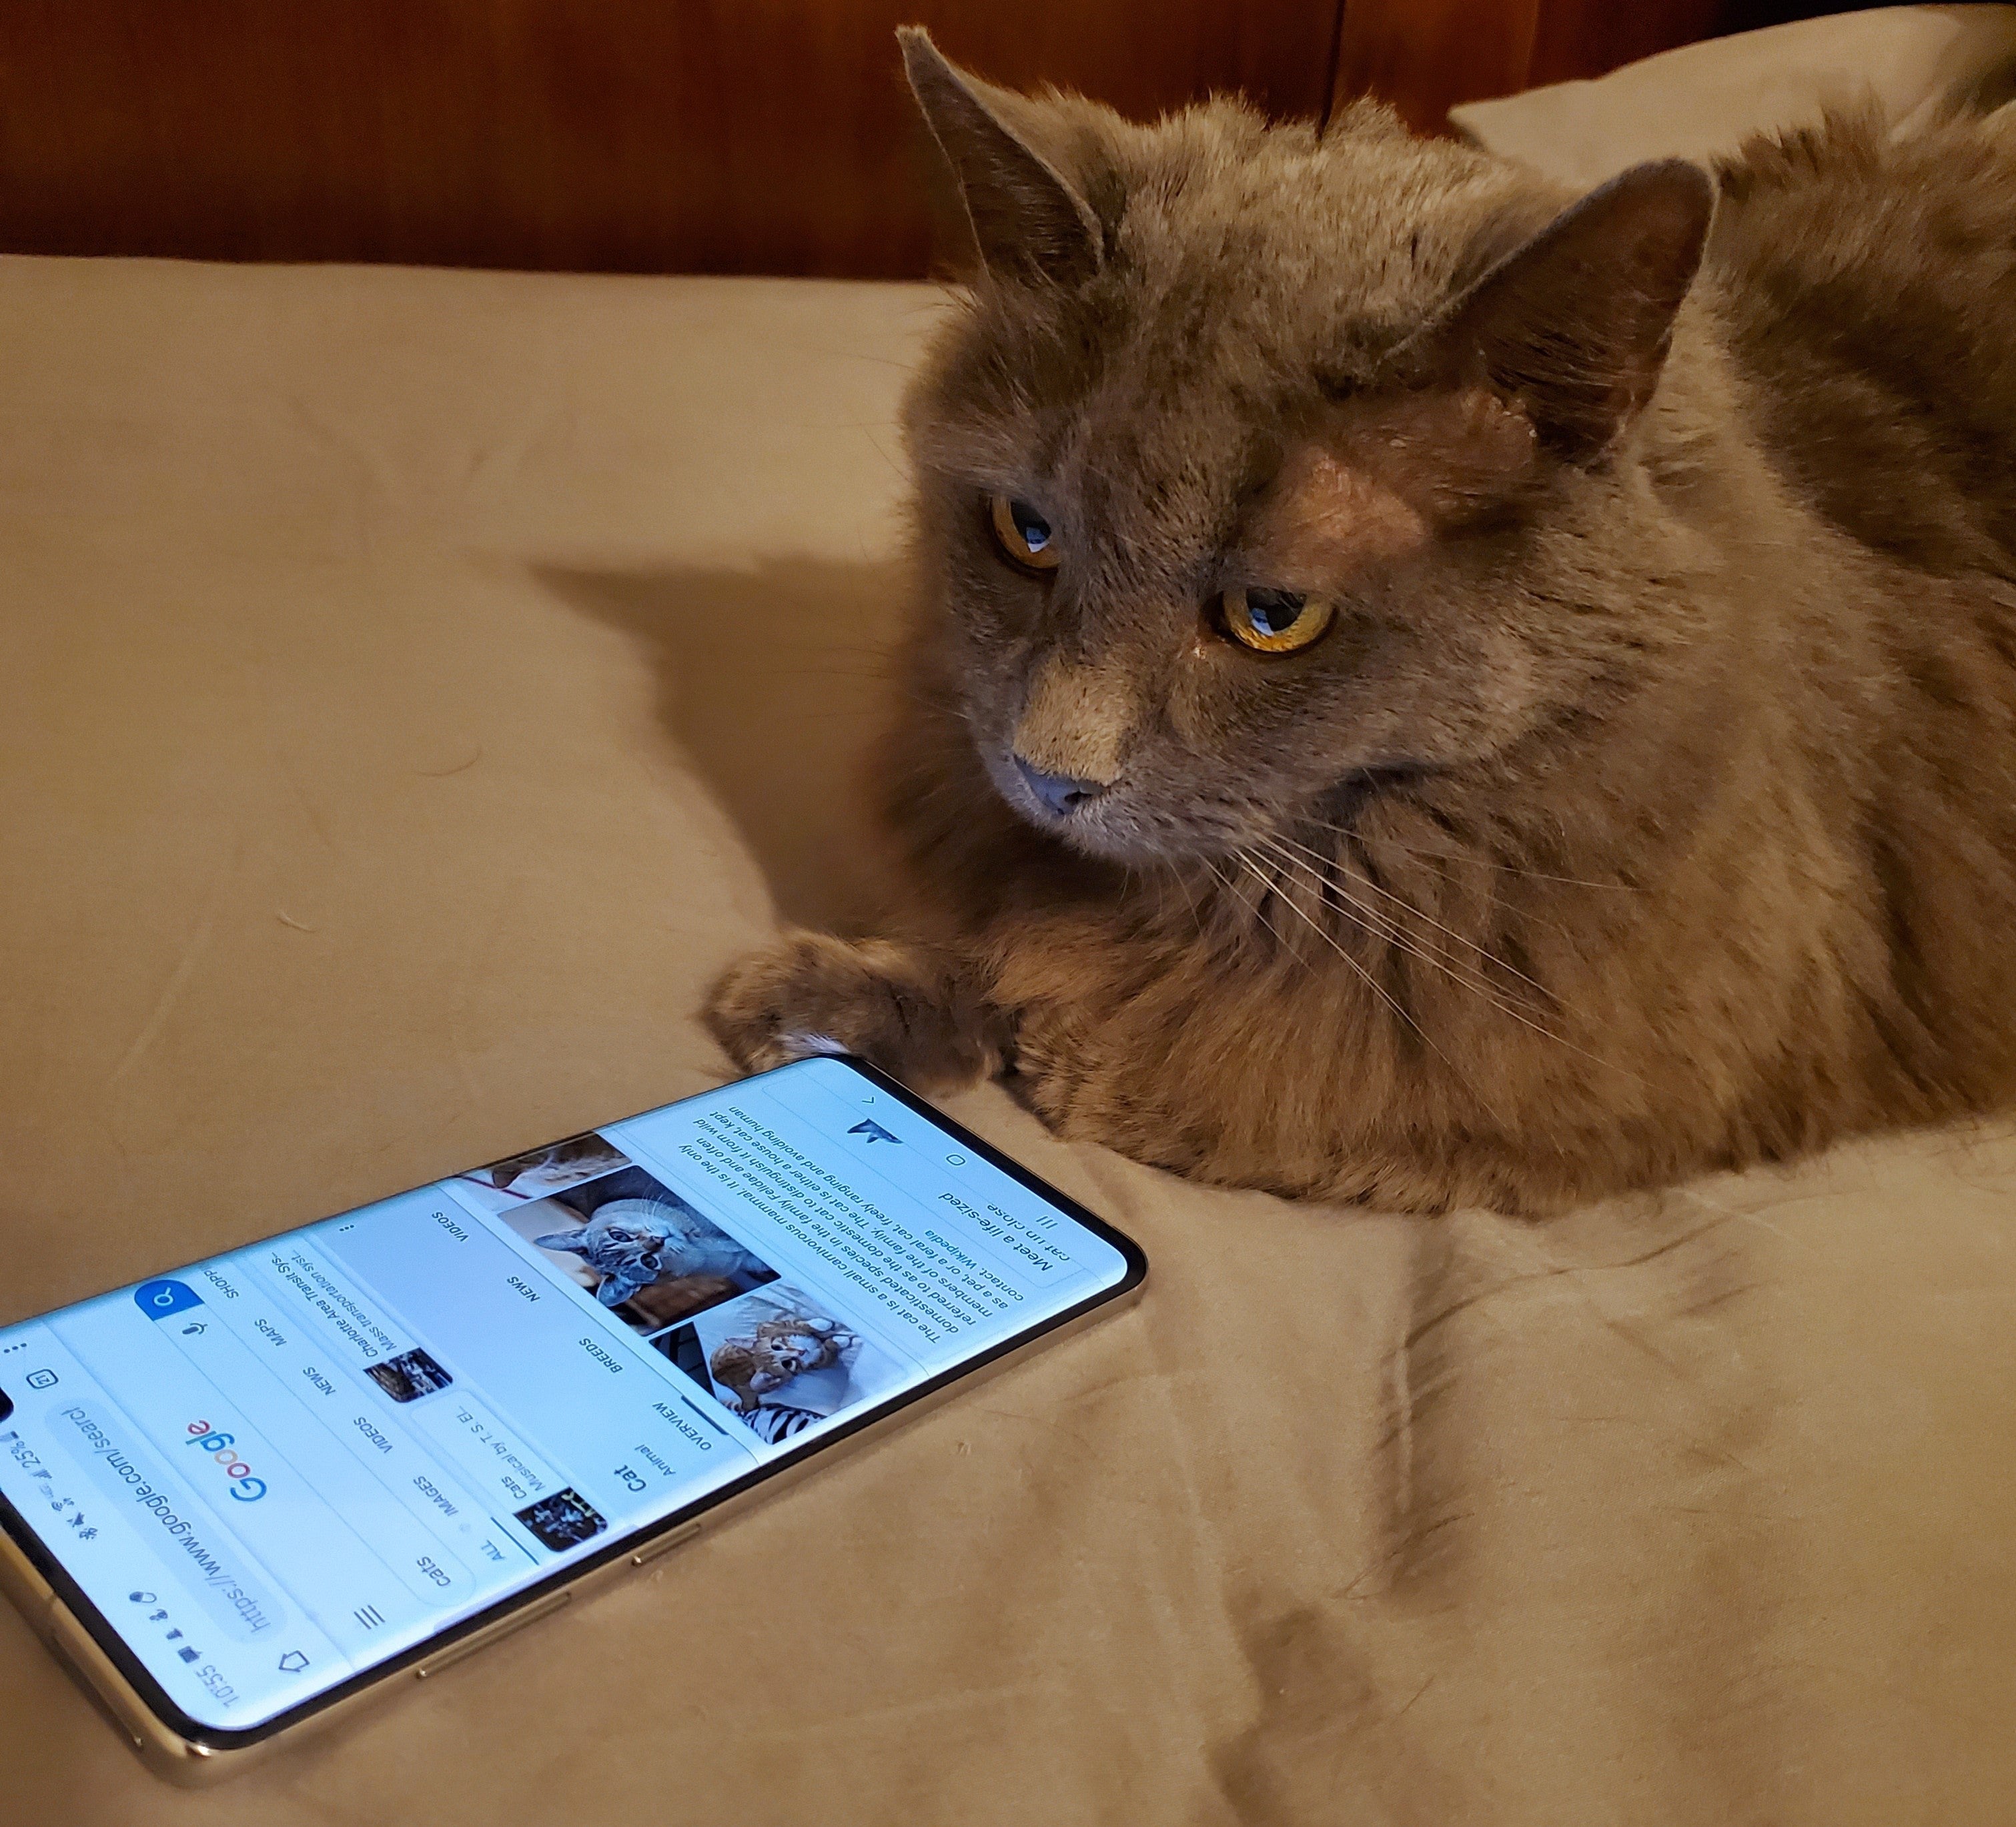 Maybe the cat was behind it all along! - Creepy examples of ad targeting: are smartphones eavesdropping on us?